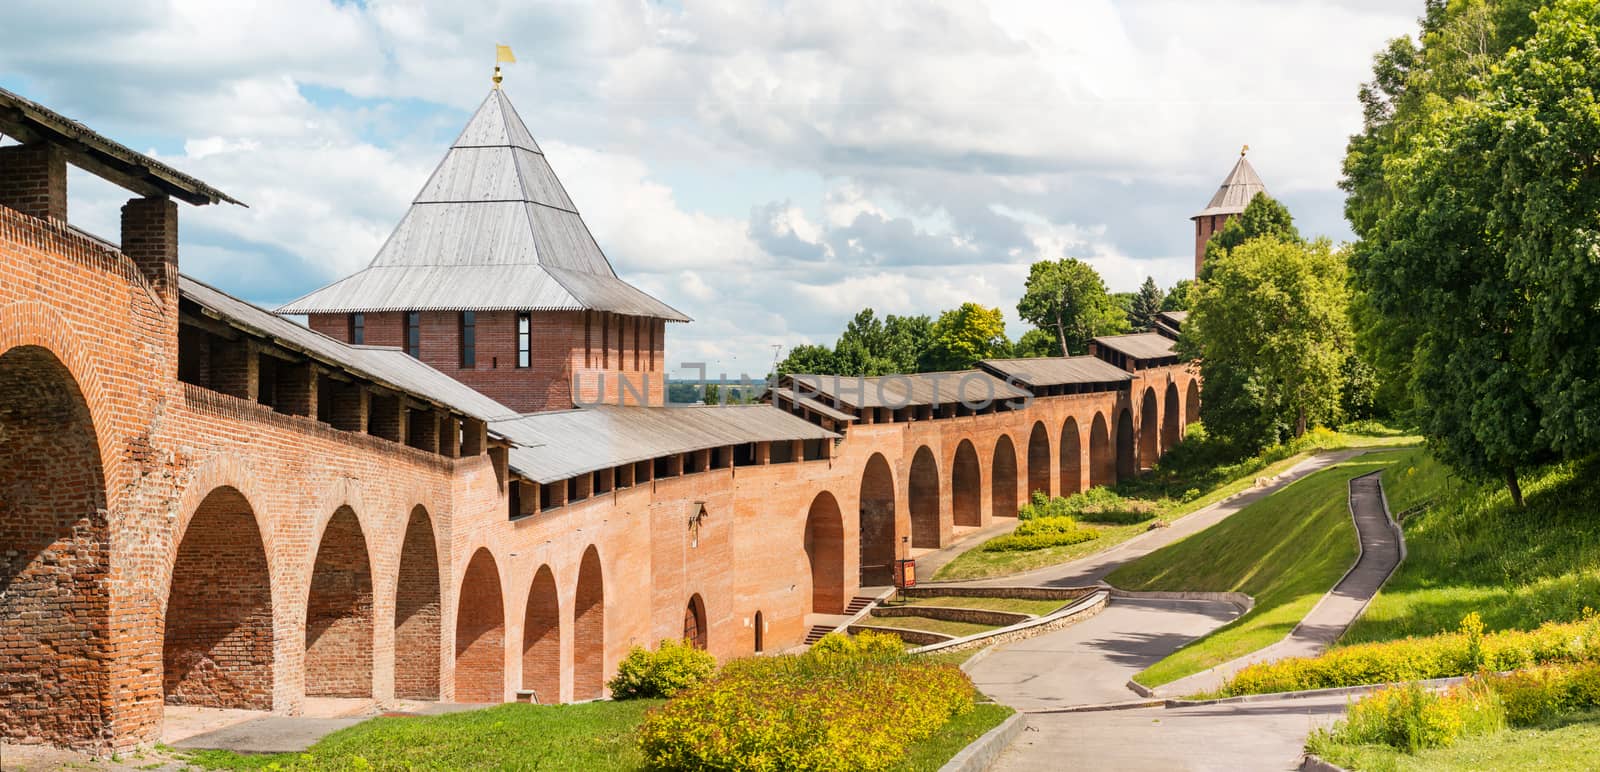 Tower and wall of middle ages fortress Kremlin in town Nizhniy Novgorod, Russia